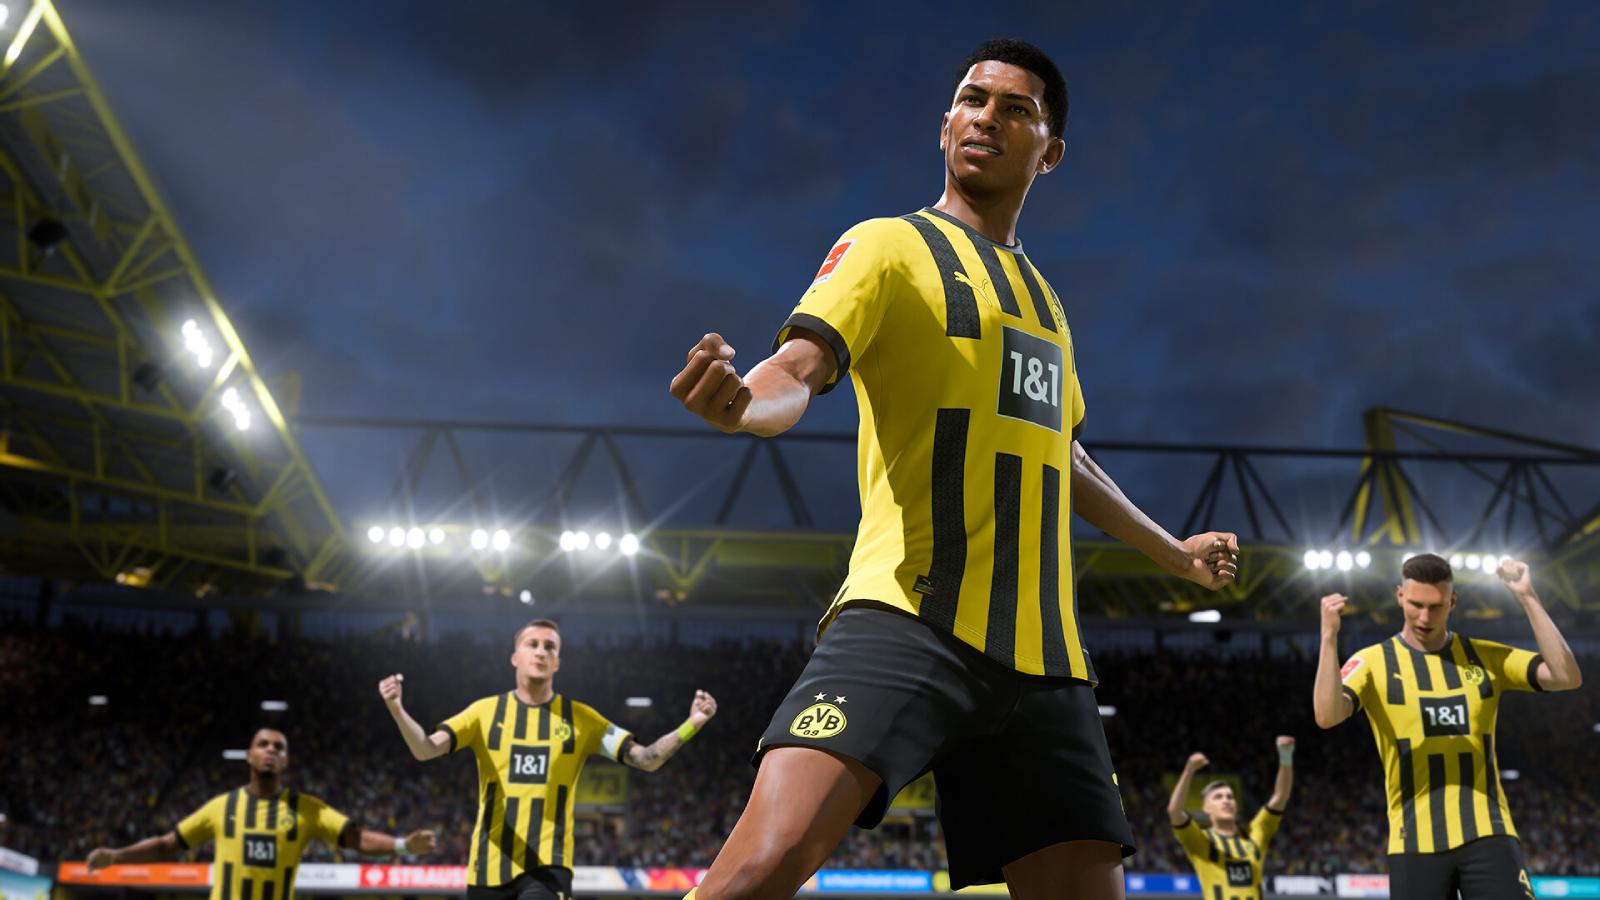 FIFA 23 player ratings, including the best players ranked by Overall